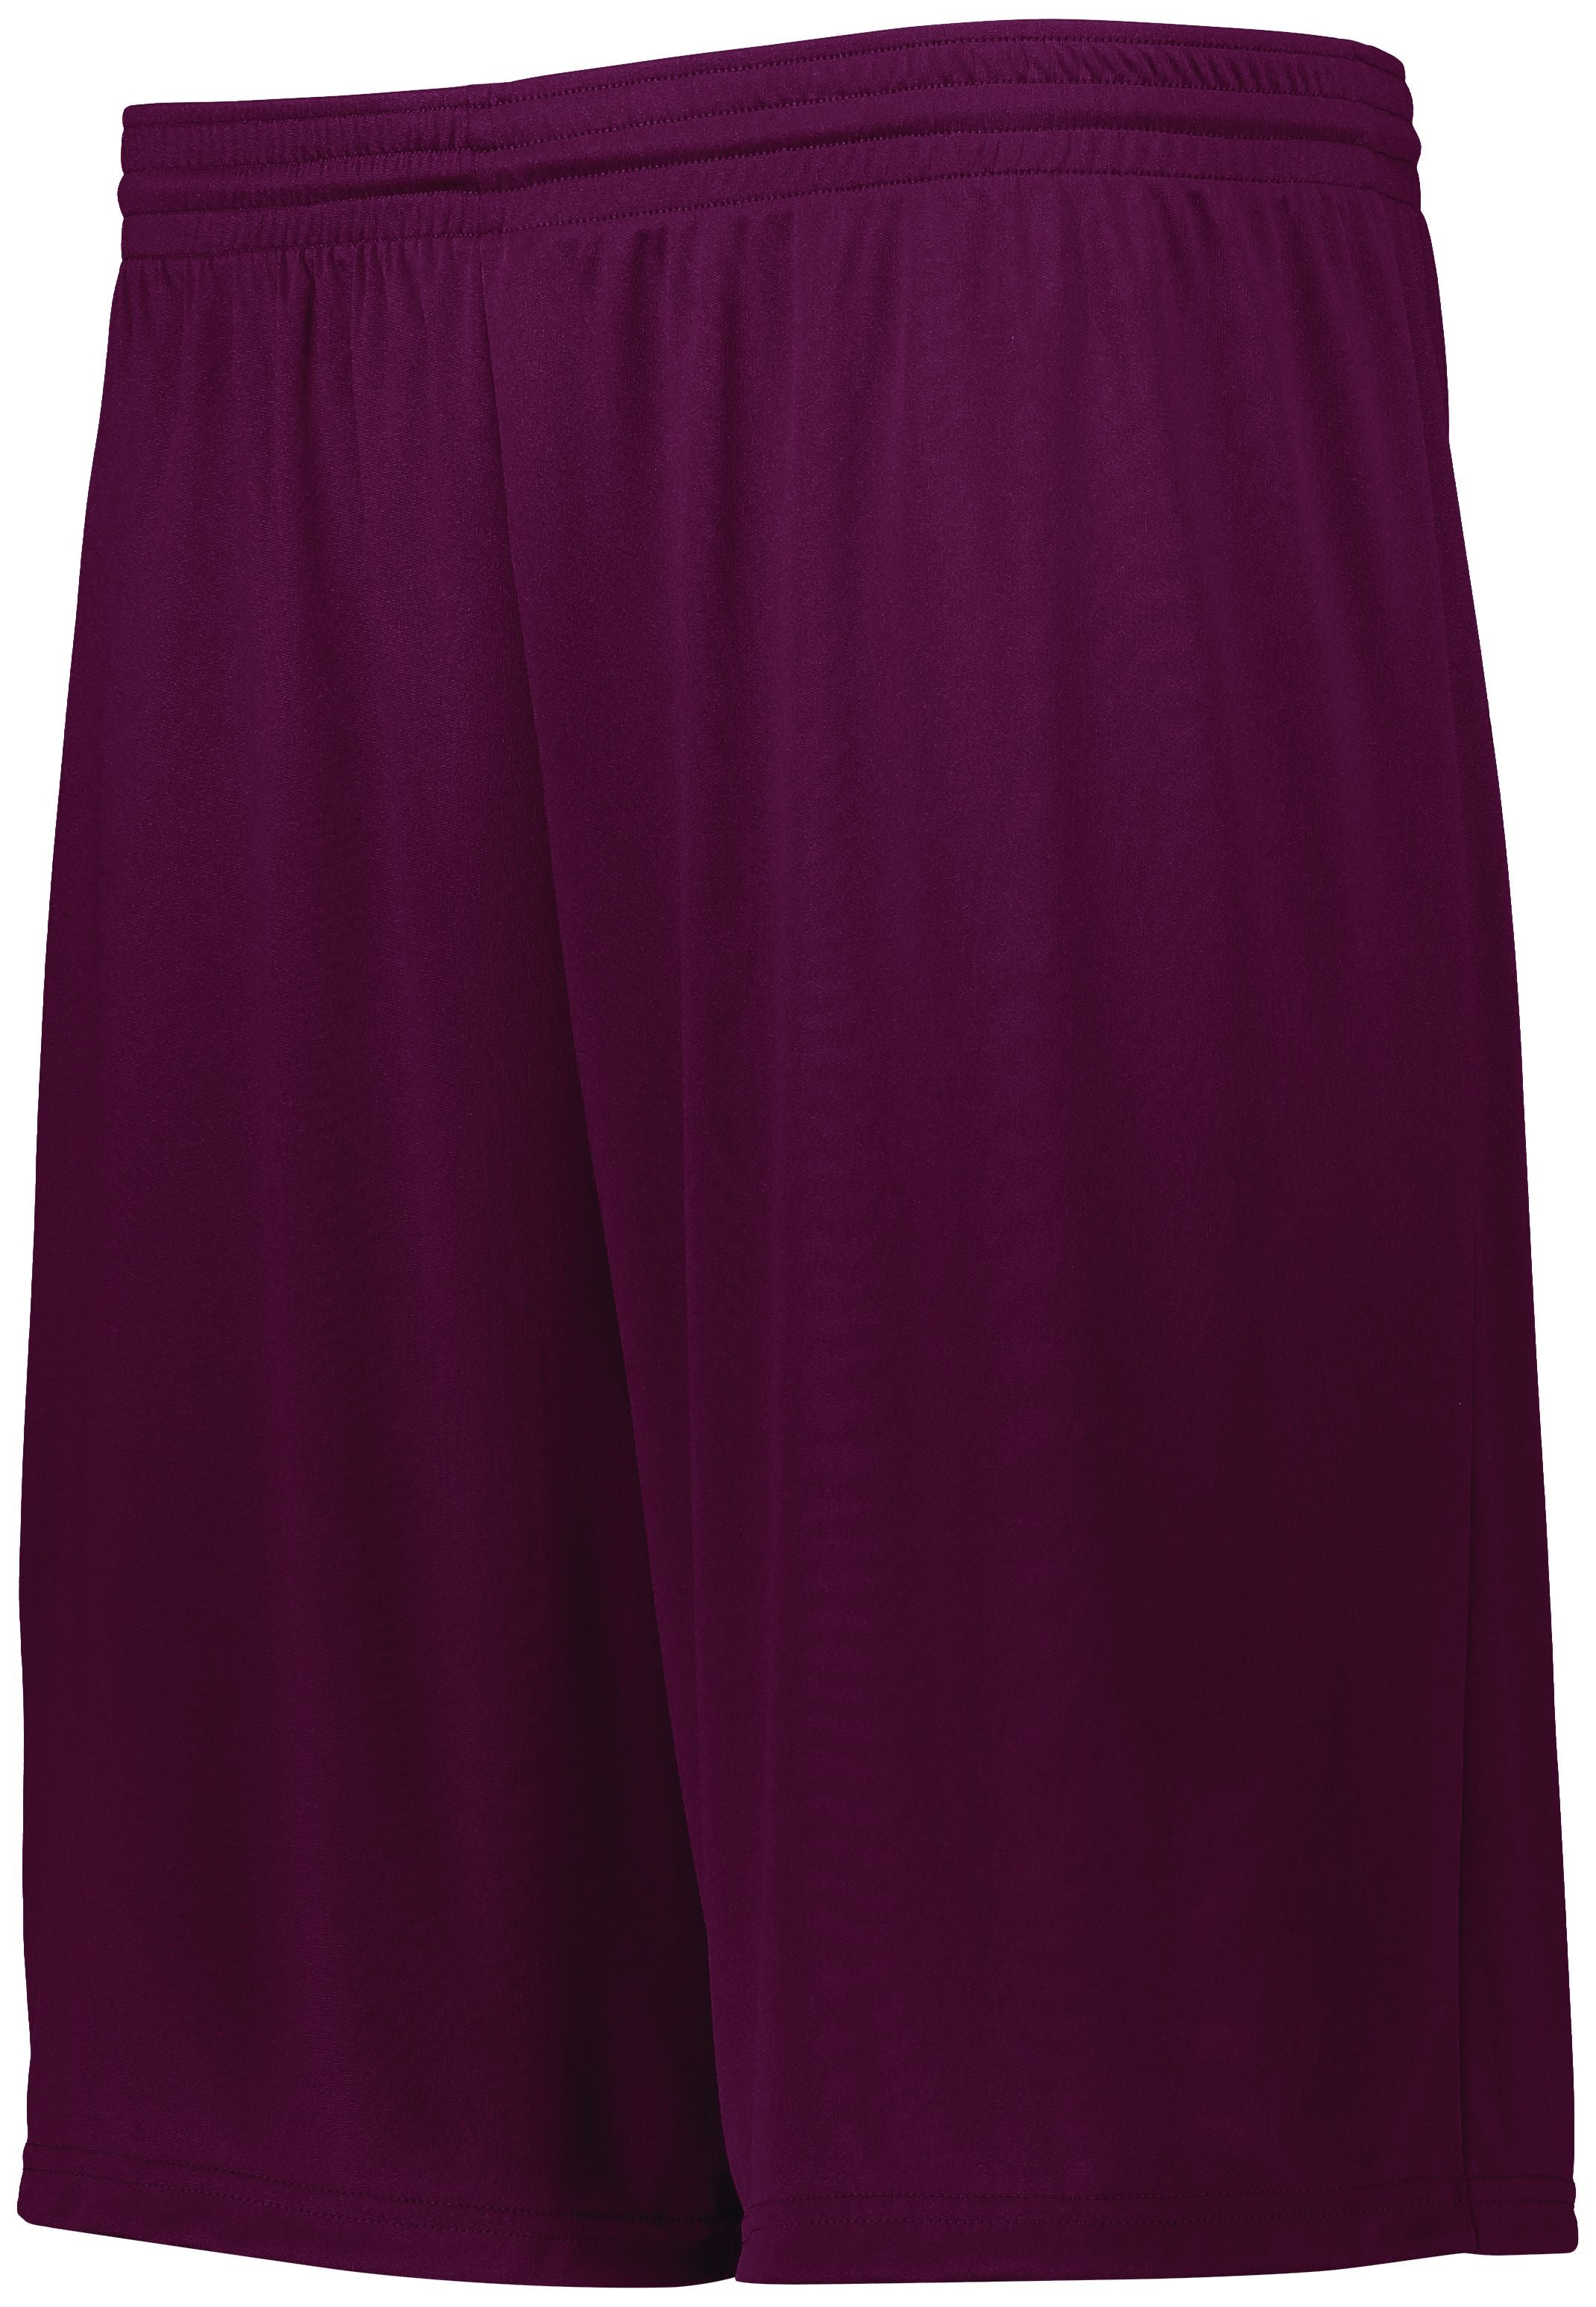 Augusta Sportswear Attain Wicking Shorts in Maroon  -Part of the Adult, Adult-Shorts, Augusta-Products product lines at KanaleyCreations.com